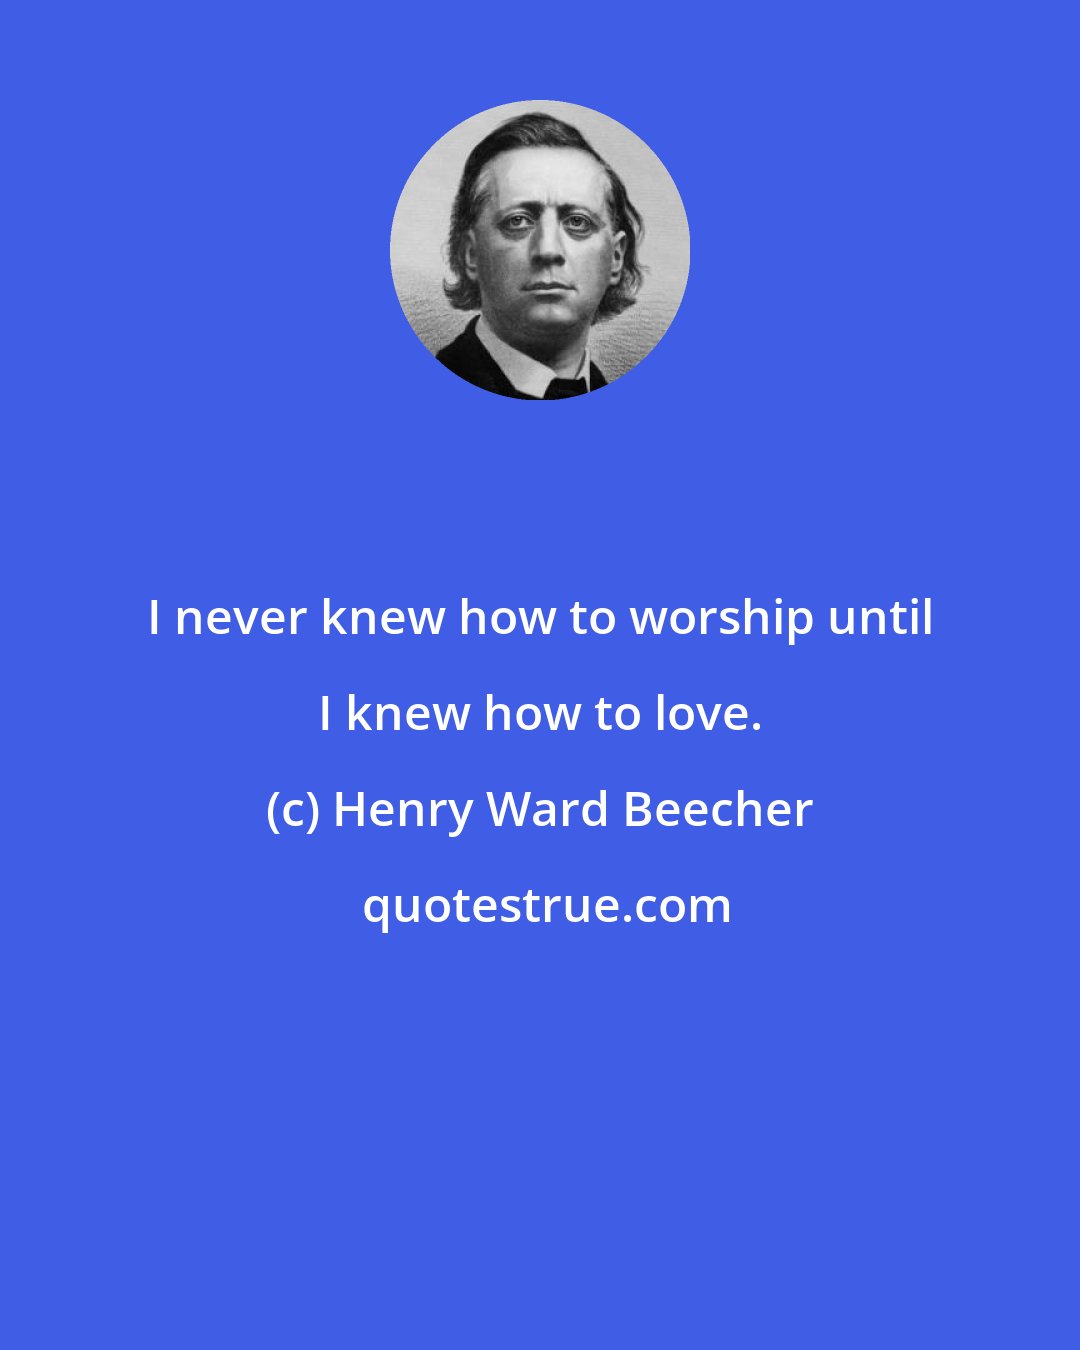 Henry Ward Beecher: I never knew how to worship until I knew how to love.